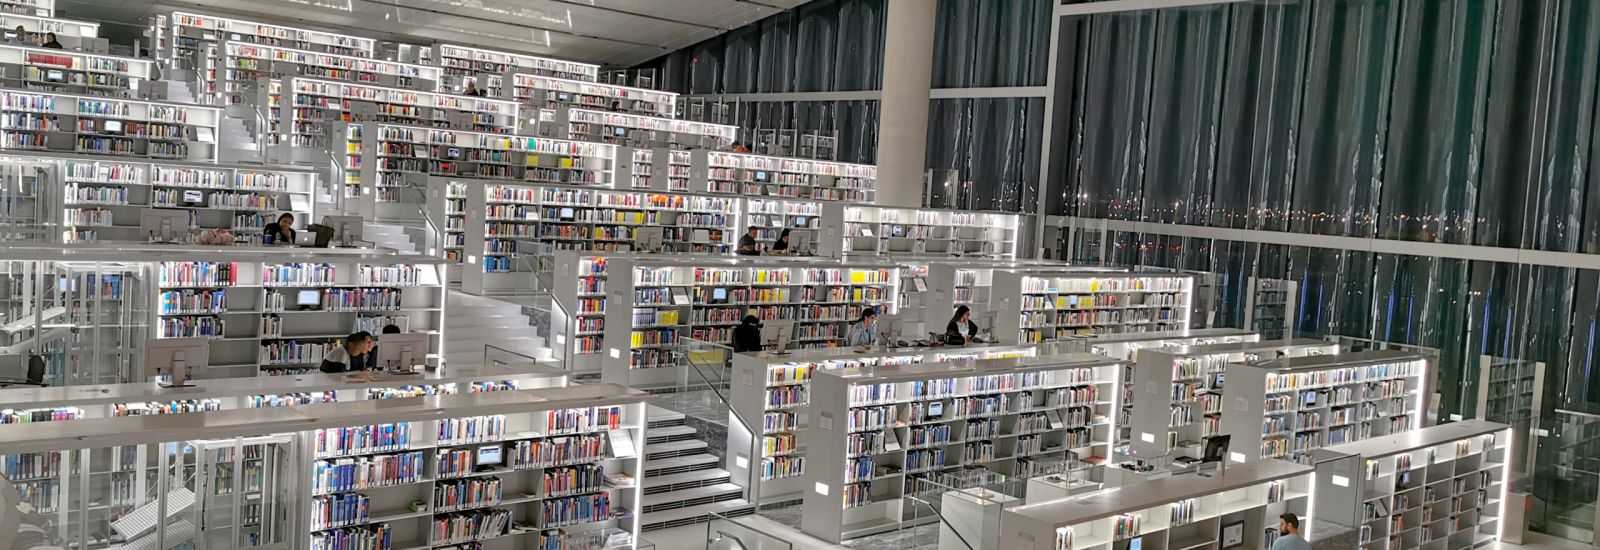 Interior of the National Library of Qatar